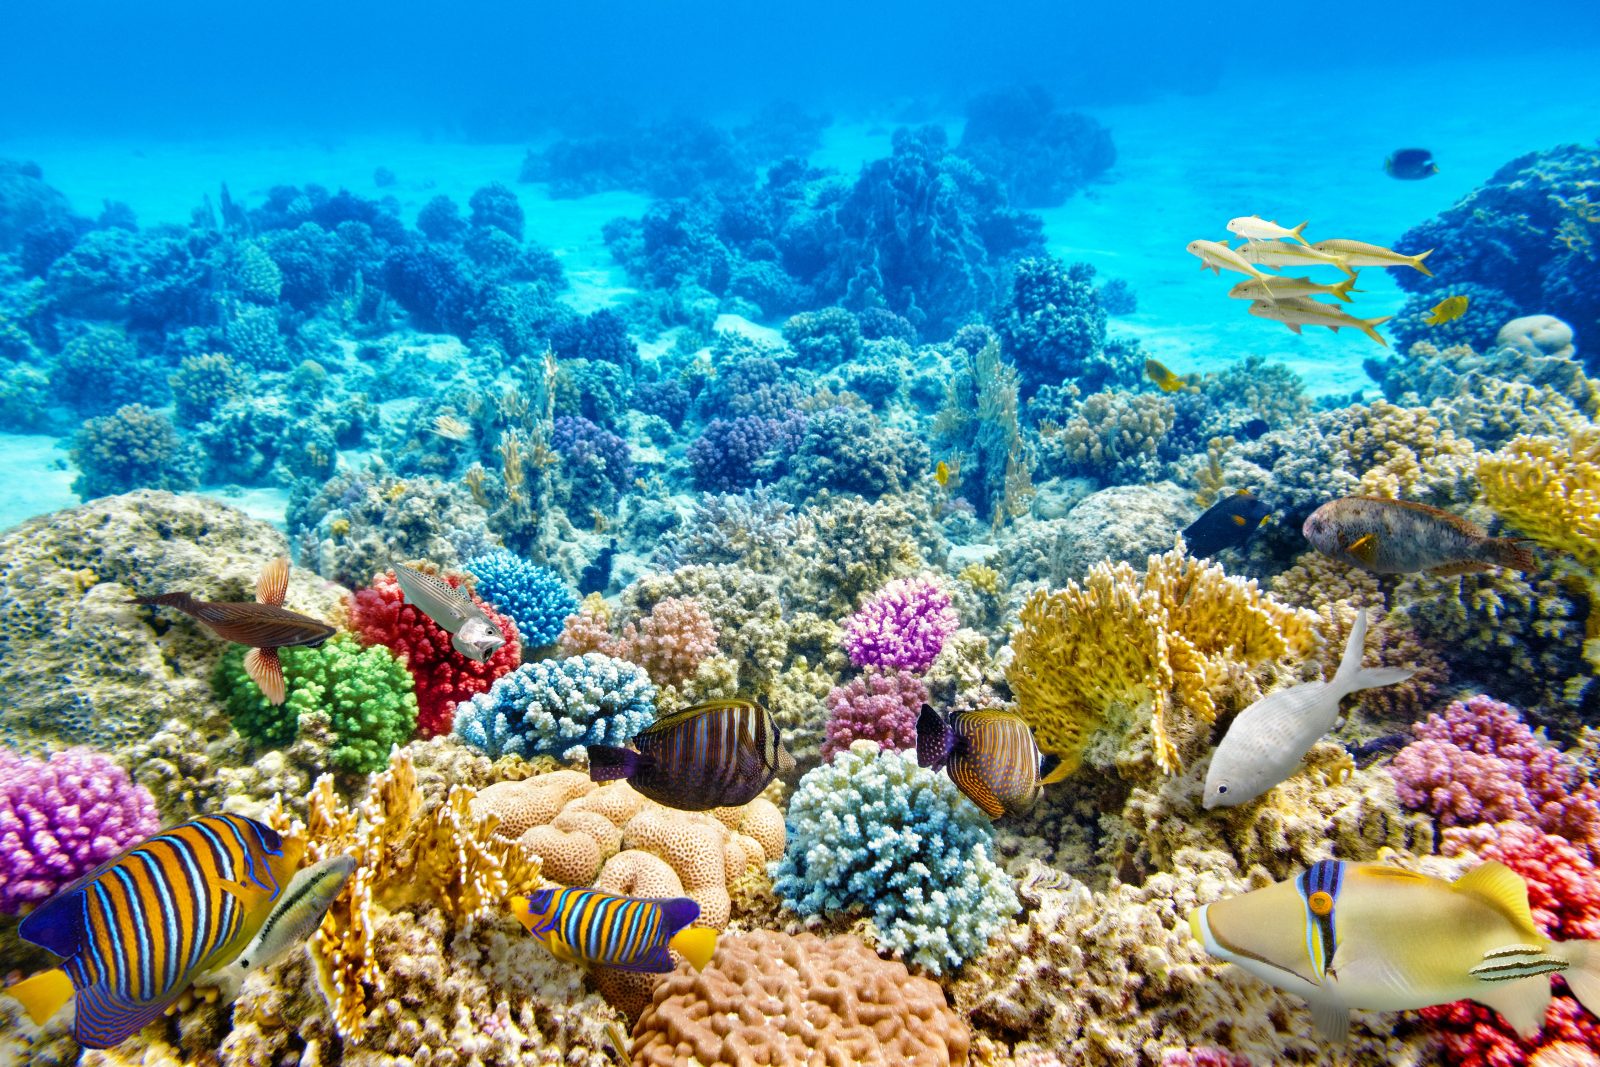 Climate Change, Silent Killer of the World’s Precious Coral Reefs